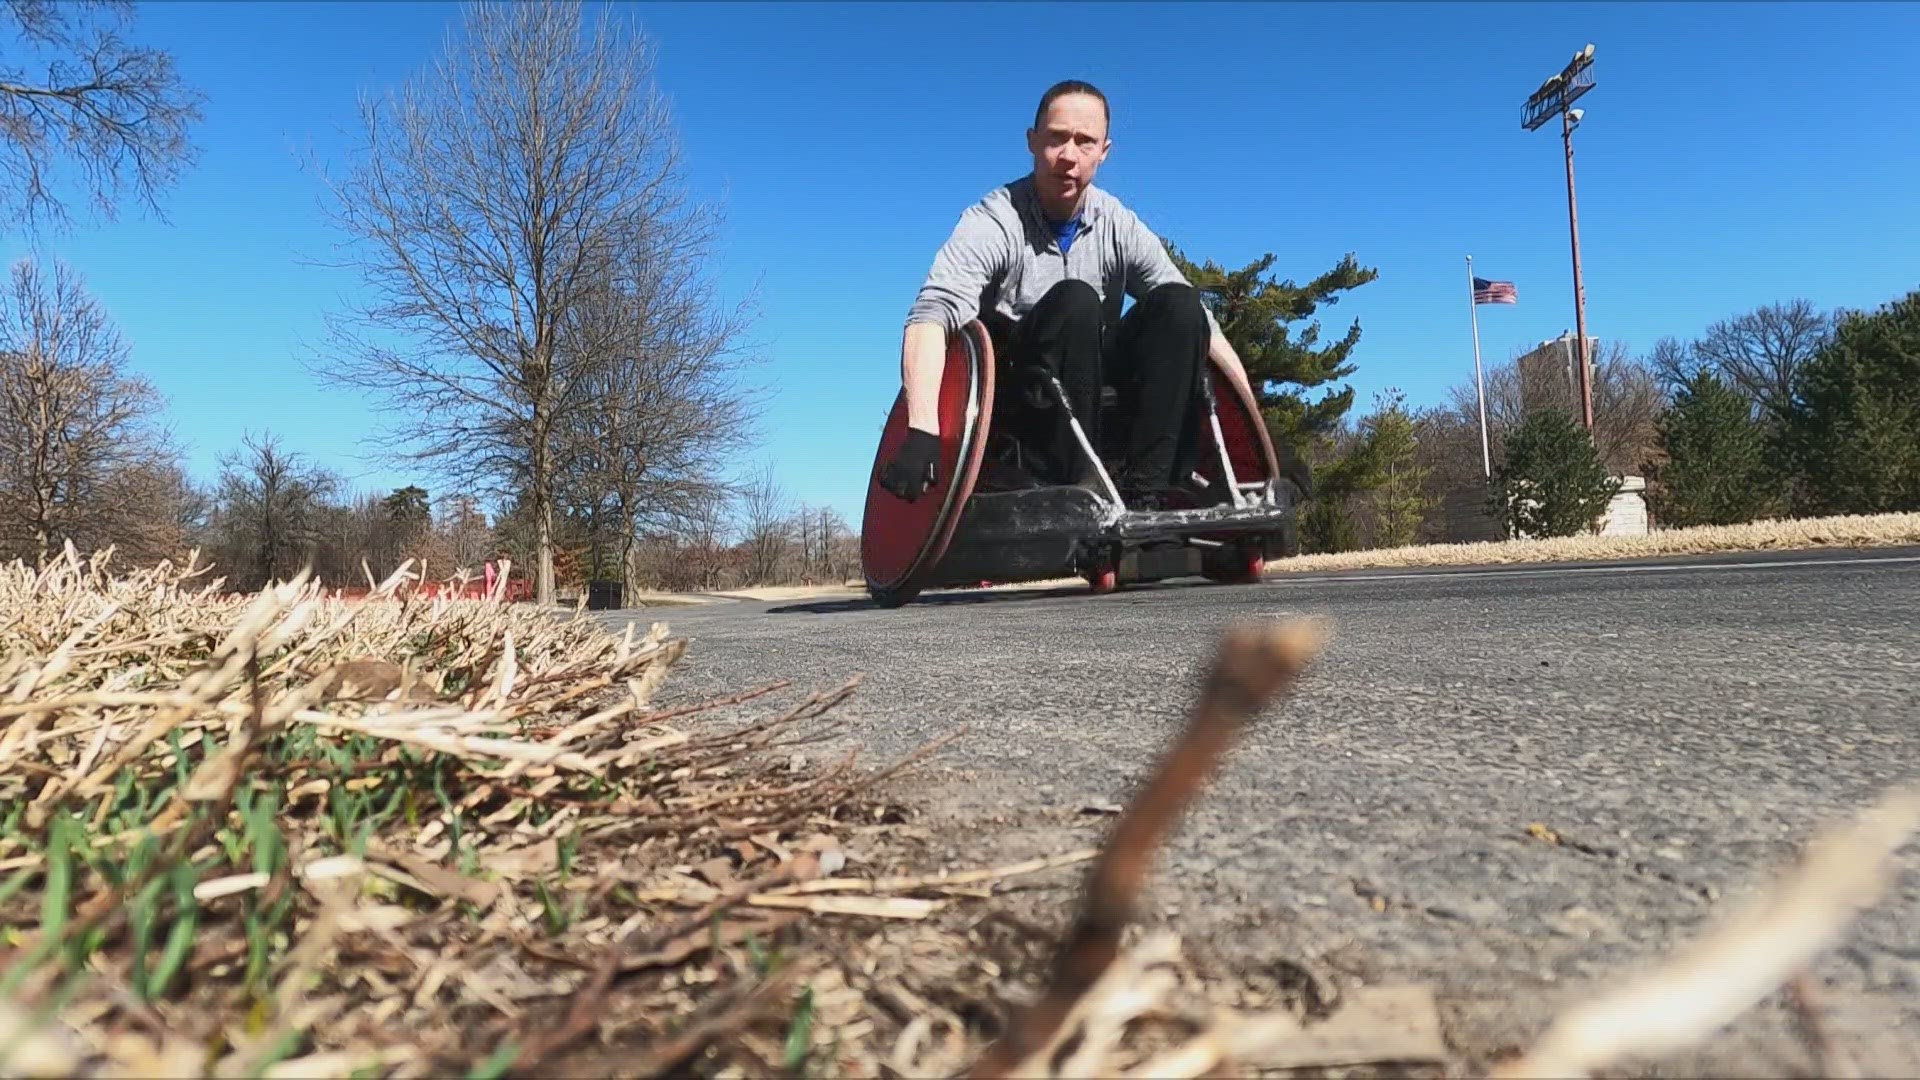 Local athlete Sarah Adams isn't letting multiple sclerosis stop her dream. She hopes to be the first woman to play on a men's team in the Paralympics.